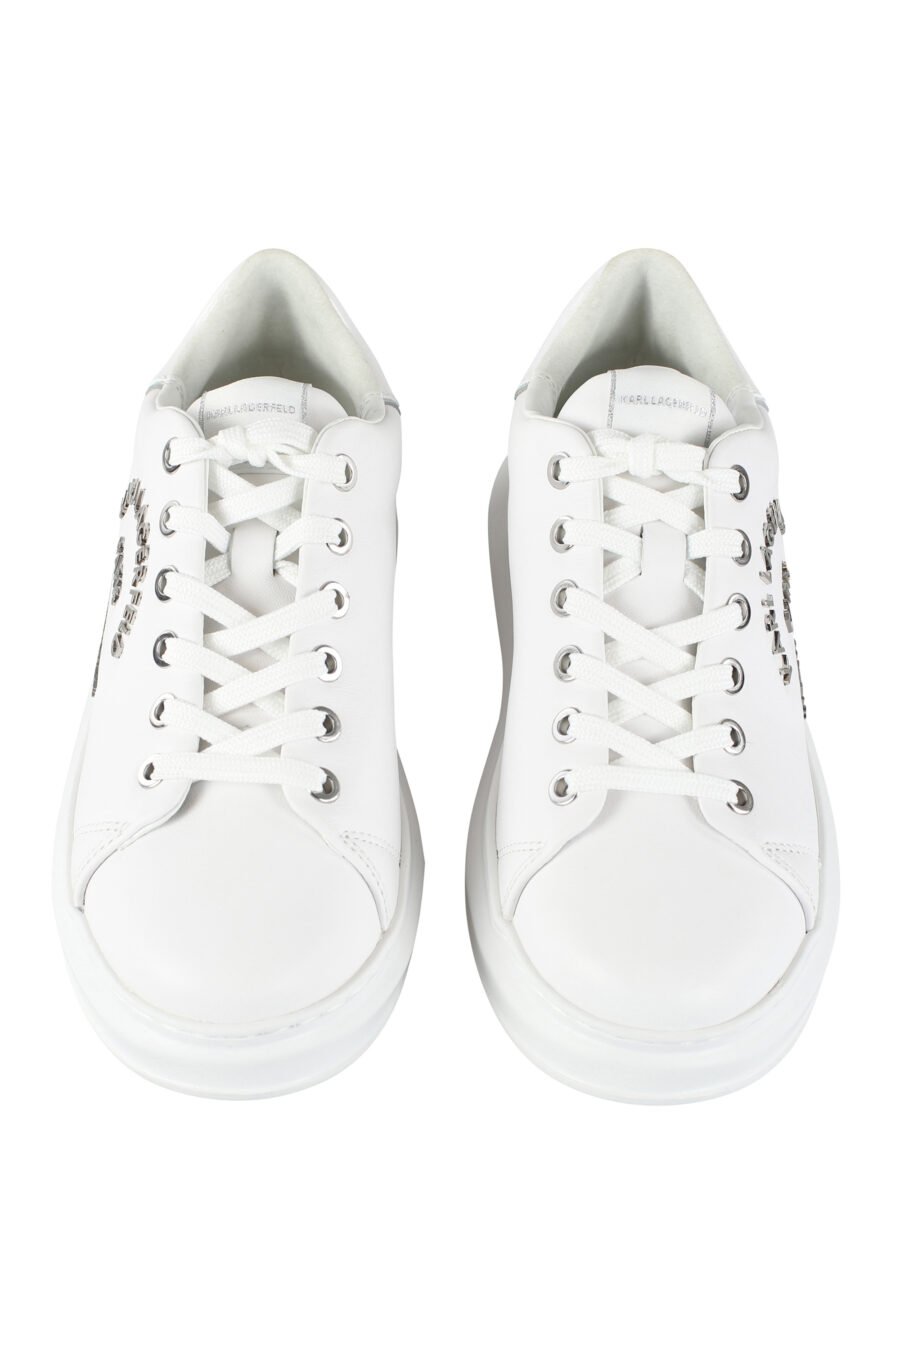 White trainers with logo lettering "rue st guillaume" silver - IMG 9621 1